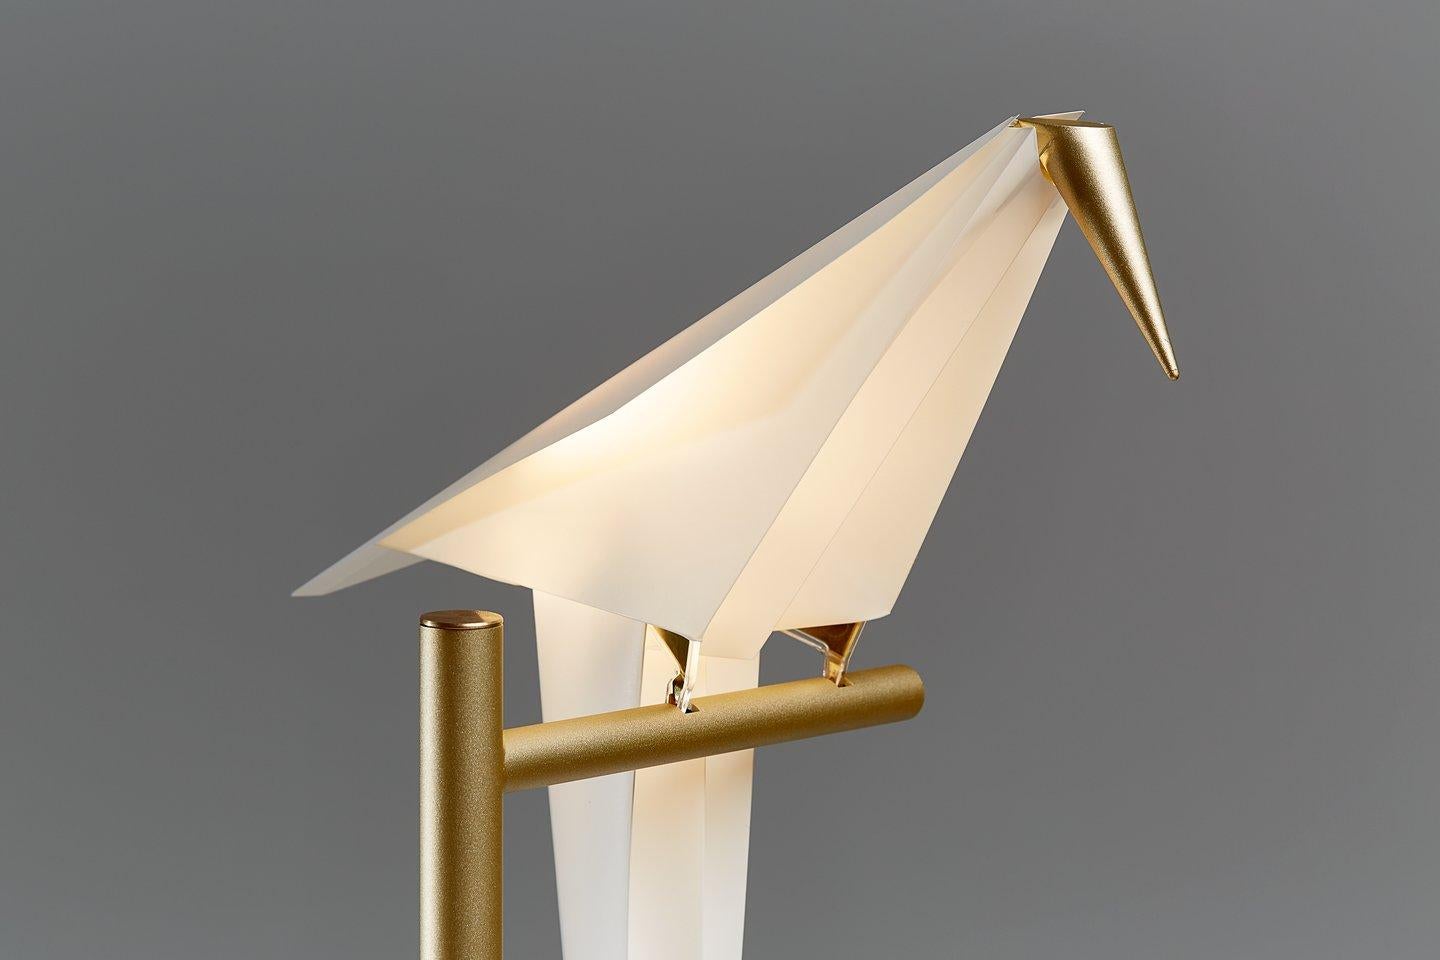 The Perch Light Table Lamp, the smallest of its family, holds its own particular charm. You may admire the details of its delicate beauty and follow the light swinging of the bird from nearby, while comfortably seated. What’s more, you can easily